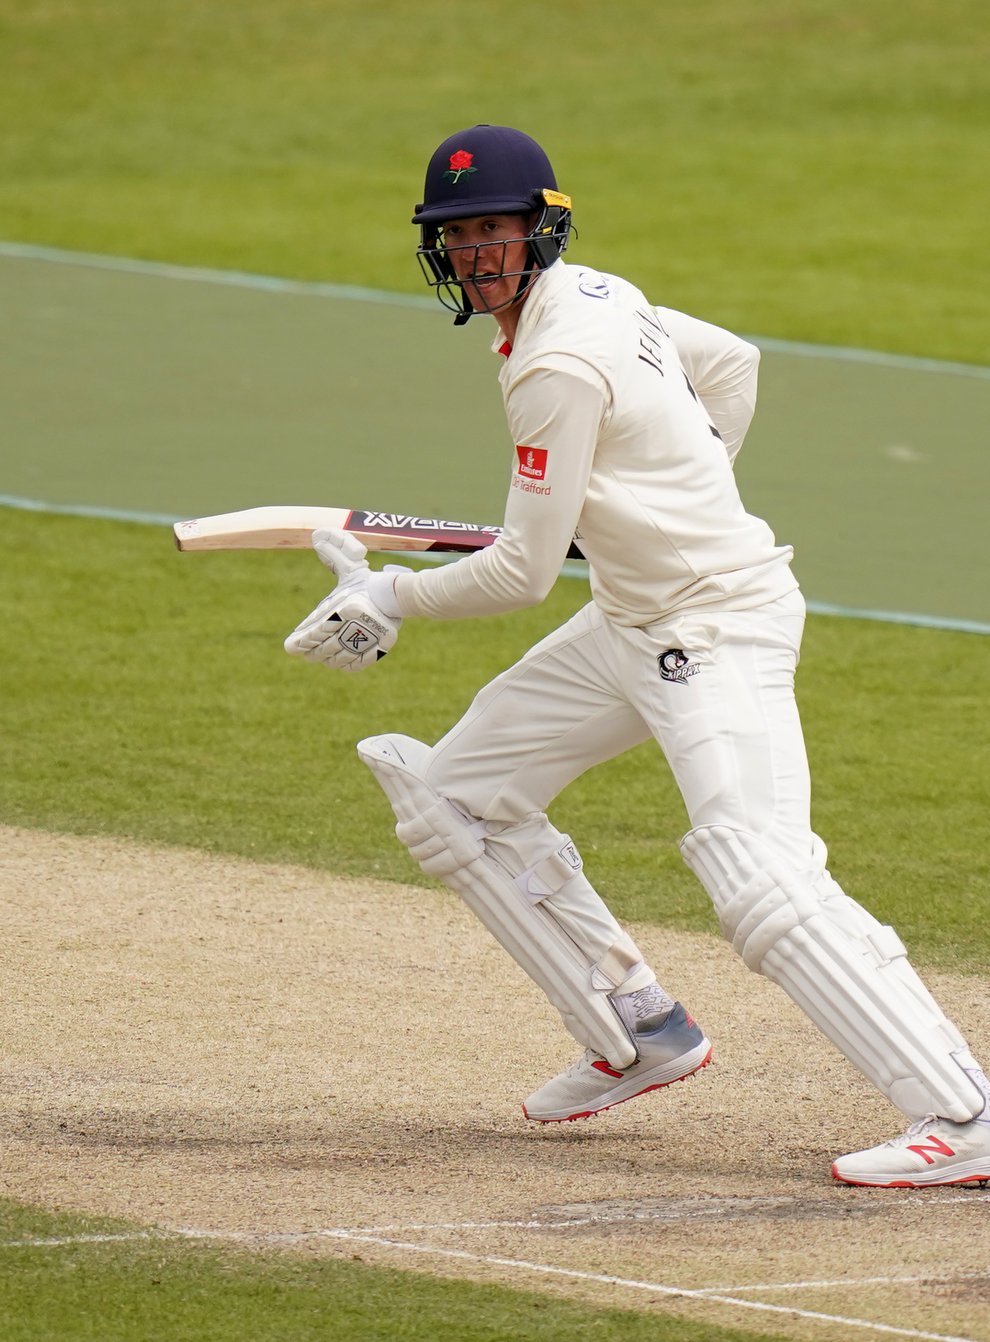 A century from Keaton Jennings put Lancashire in command in the Roses match